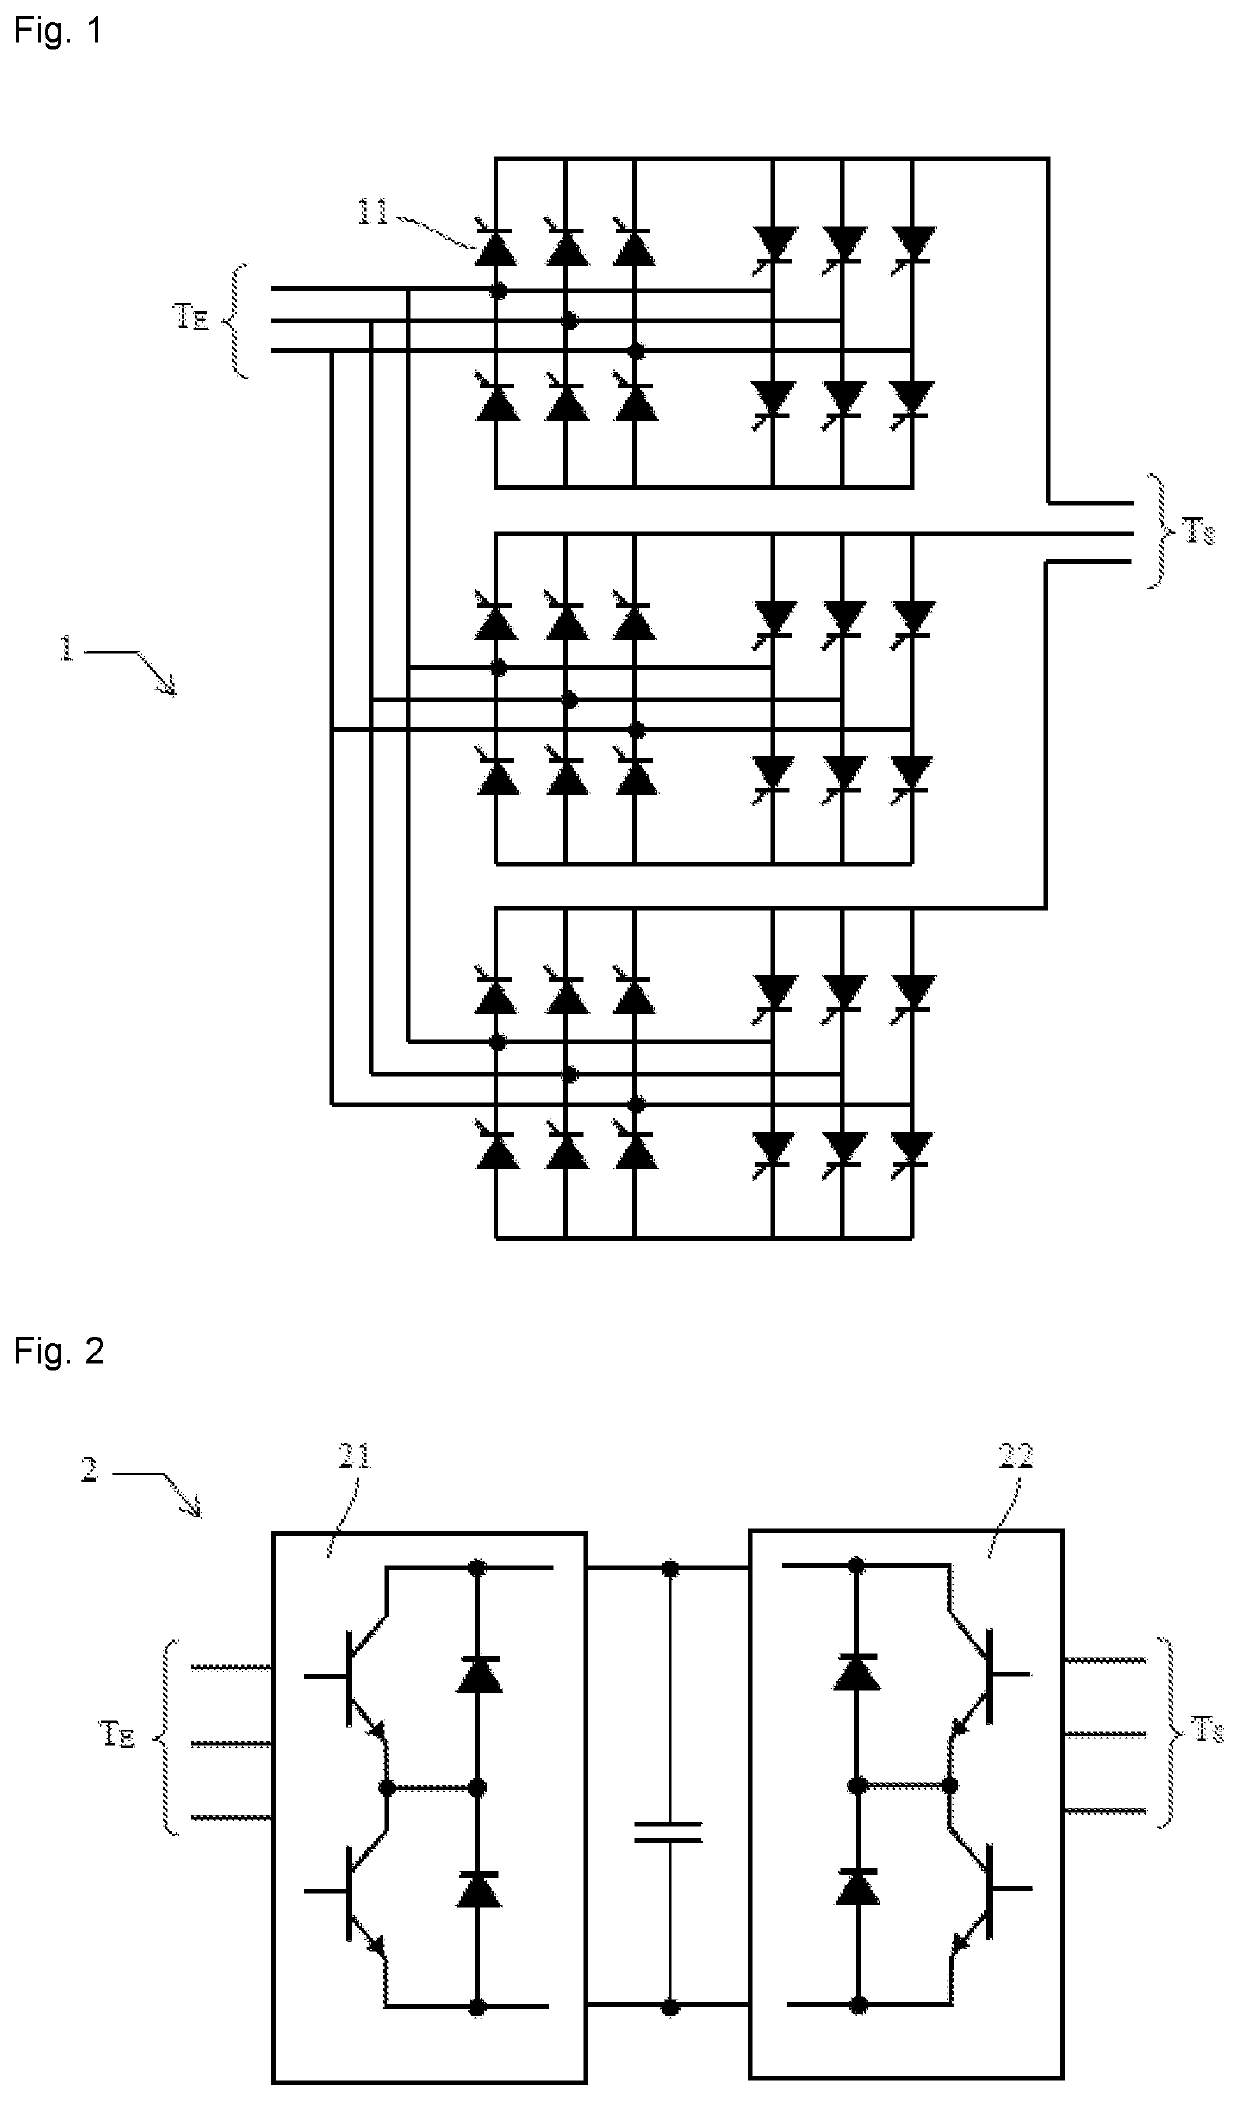 AC-AC converter comprising a matrix array of bidirectional switches of programmable configuration